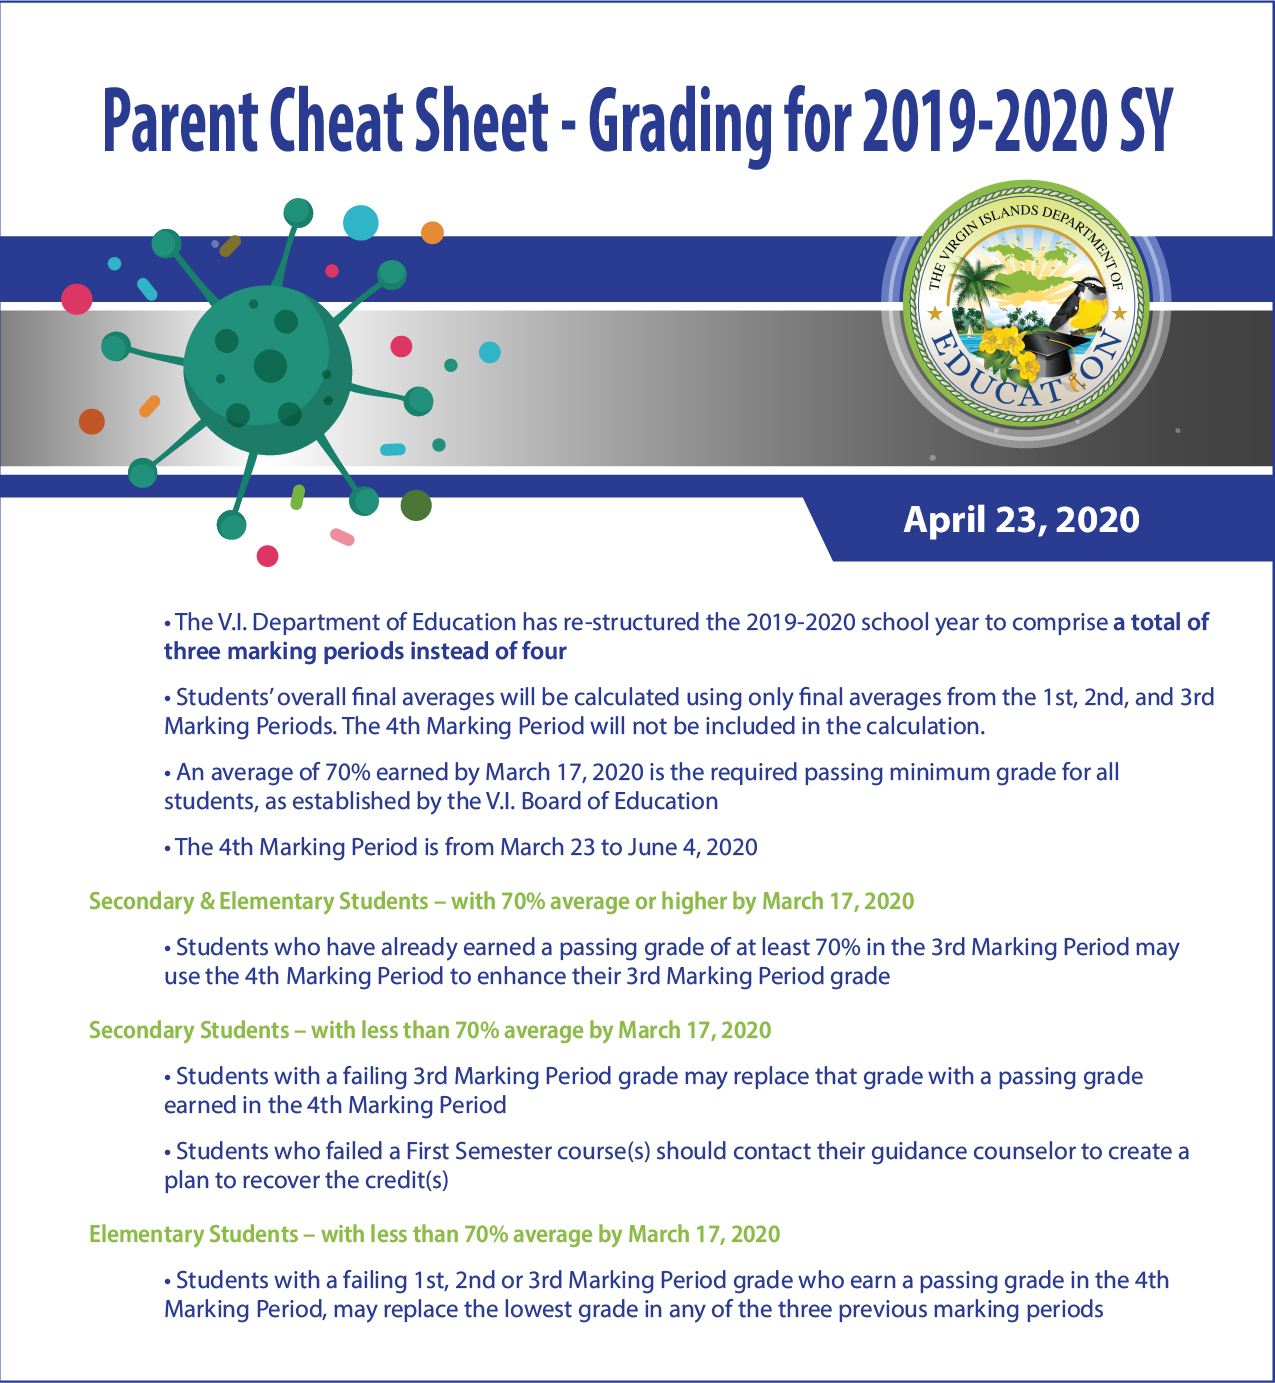 Parent Cheat Sheet - Grading for 2019-2020 SY-01.png